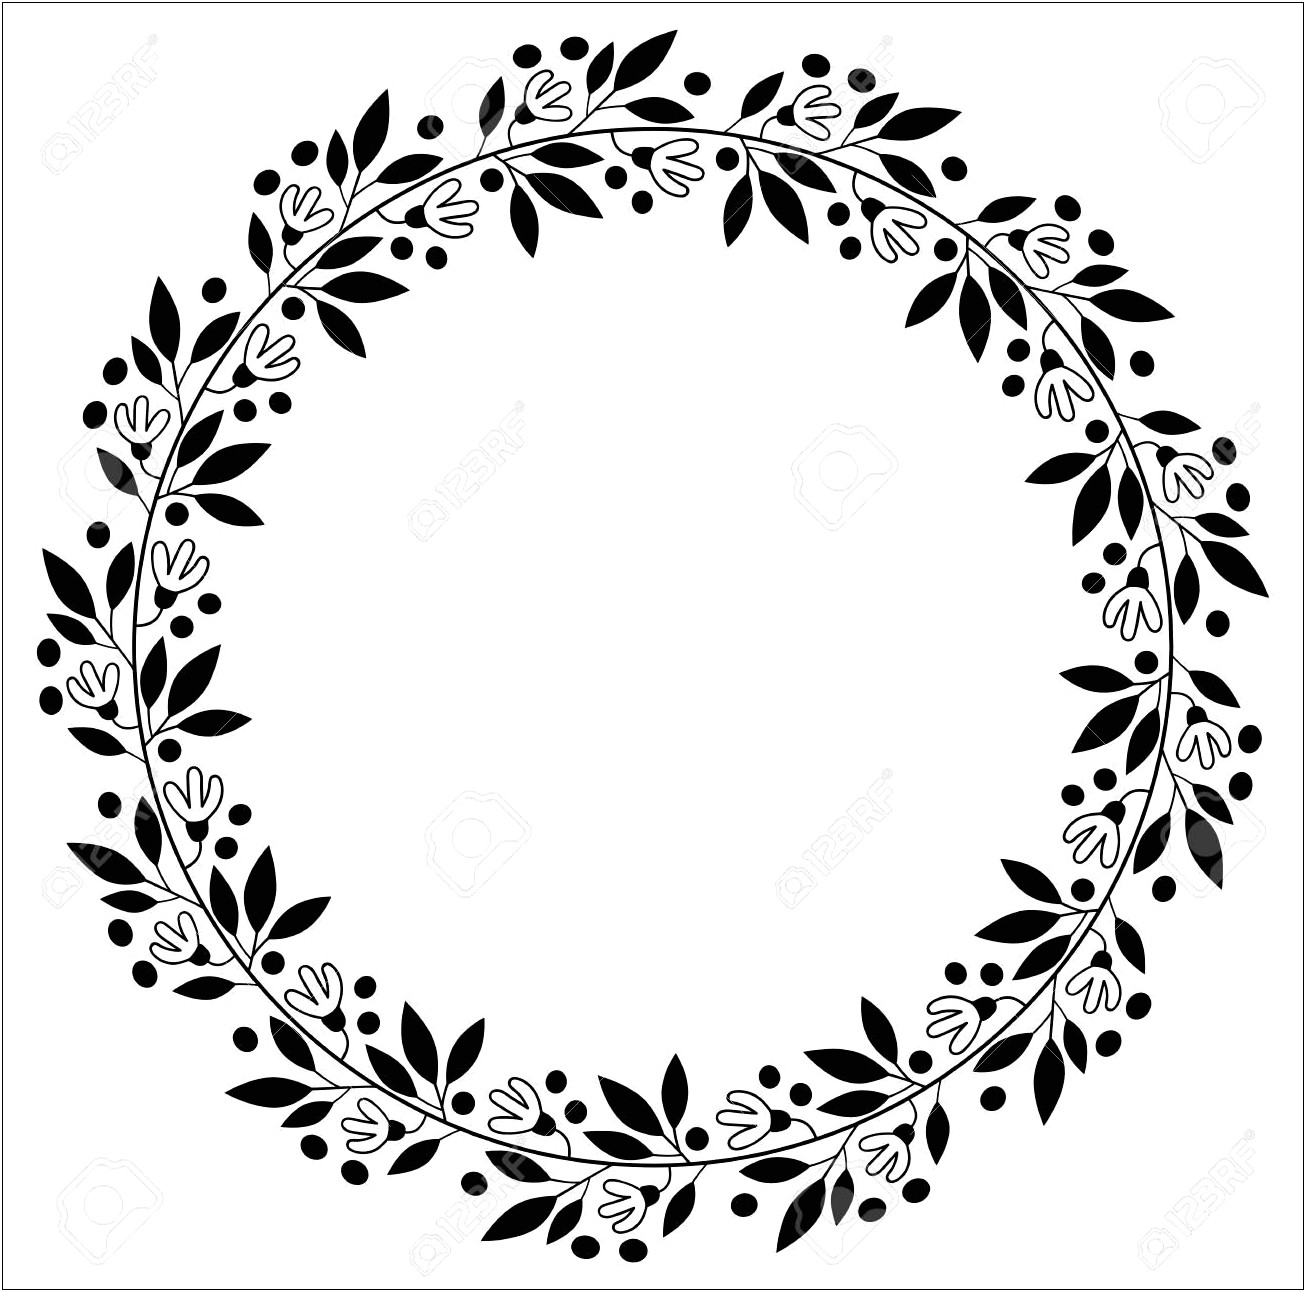 Free Floral Borders For Wedding Invitations